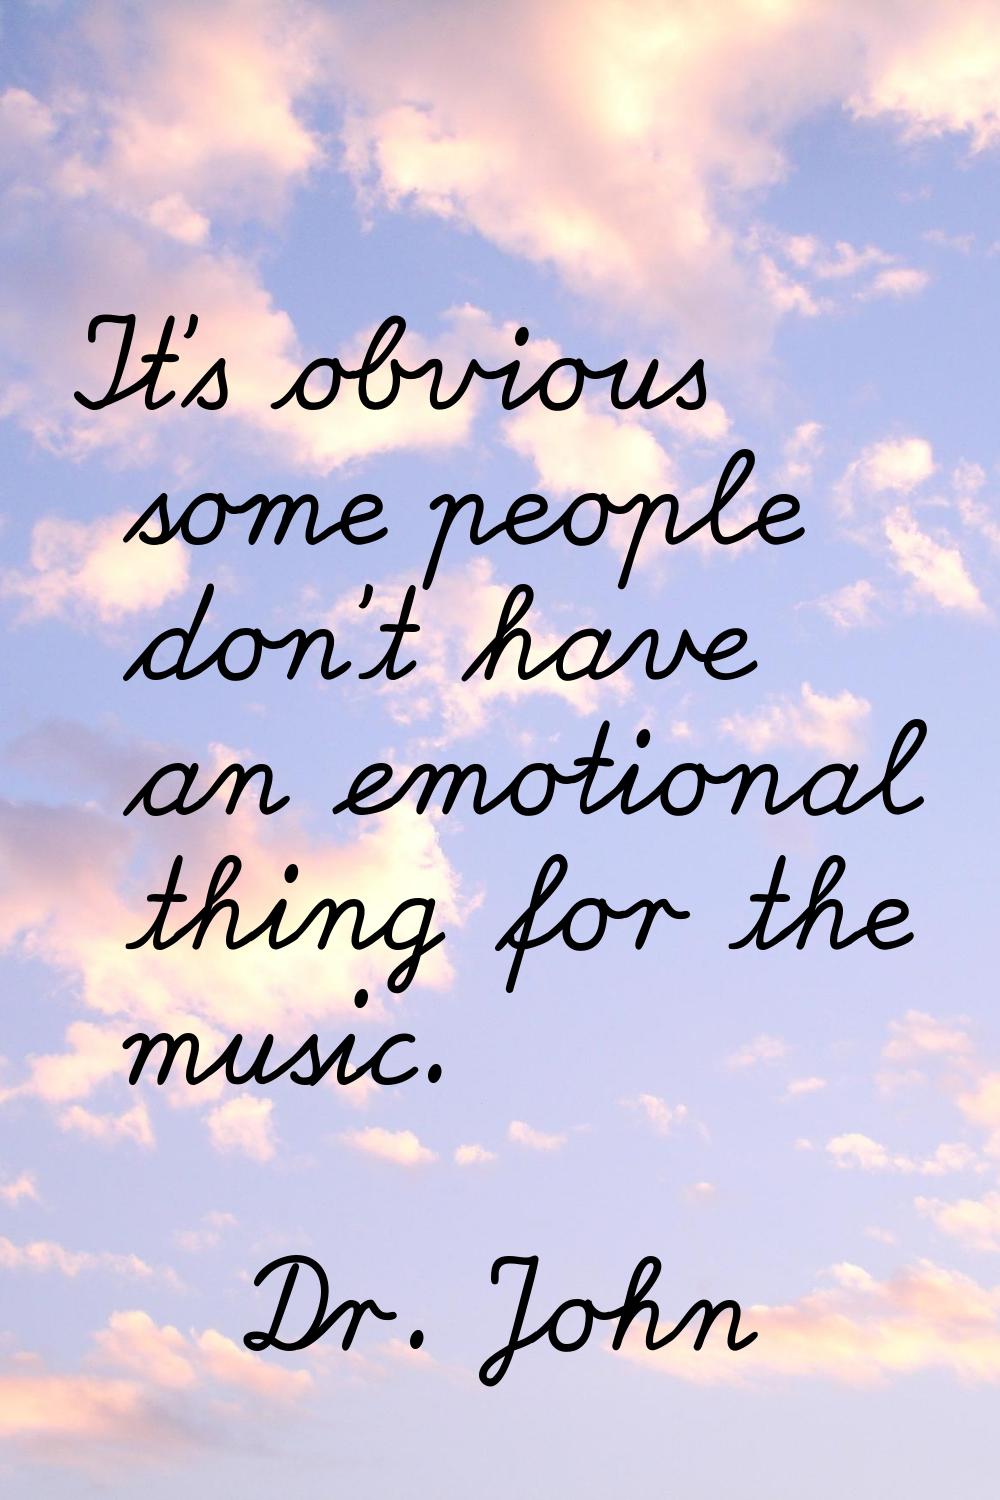 It's obvious some people don't have an emotional thing for the music.